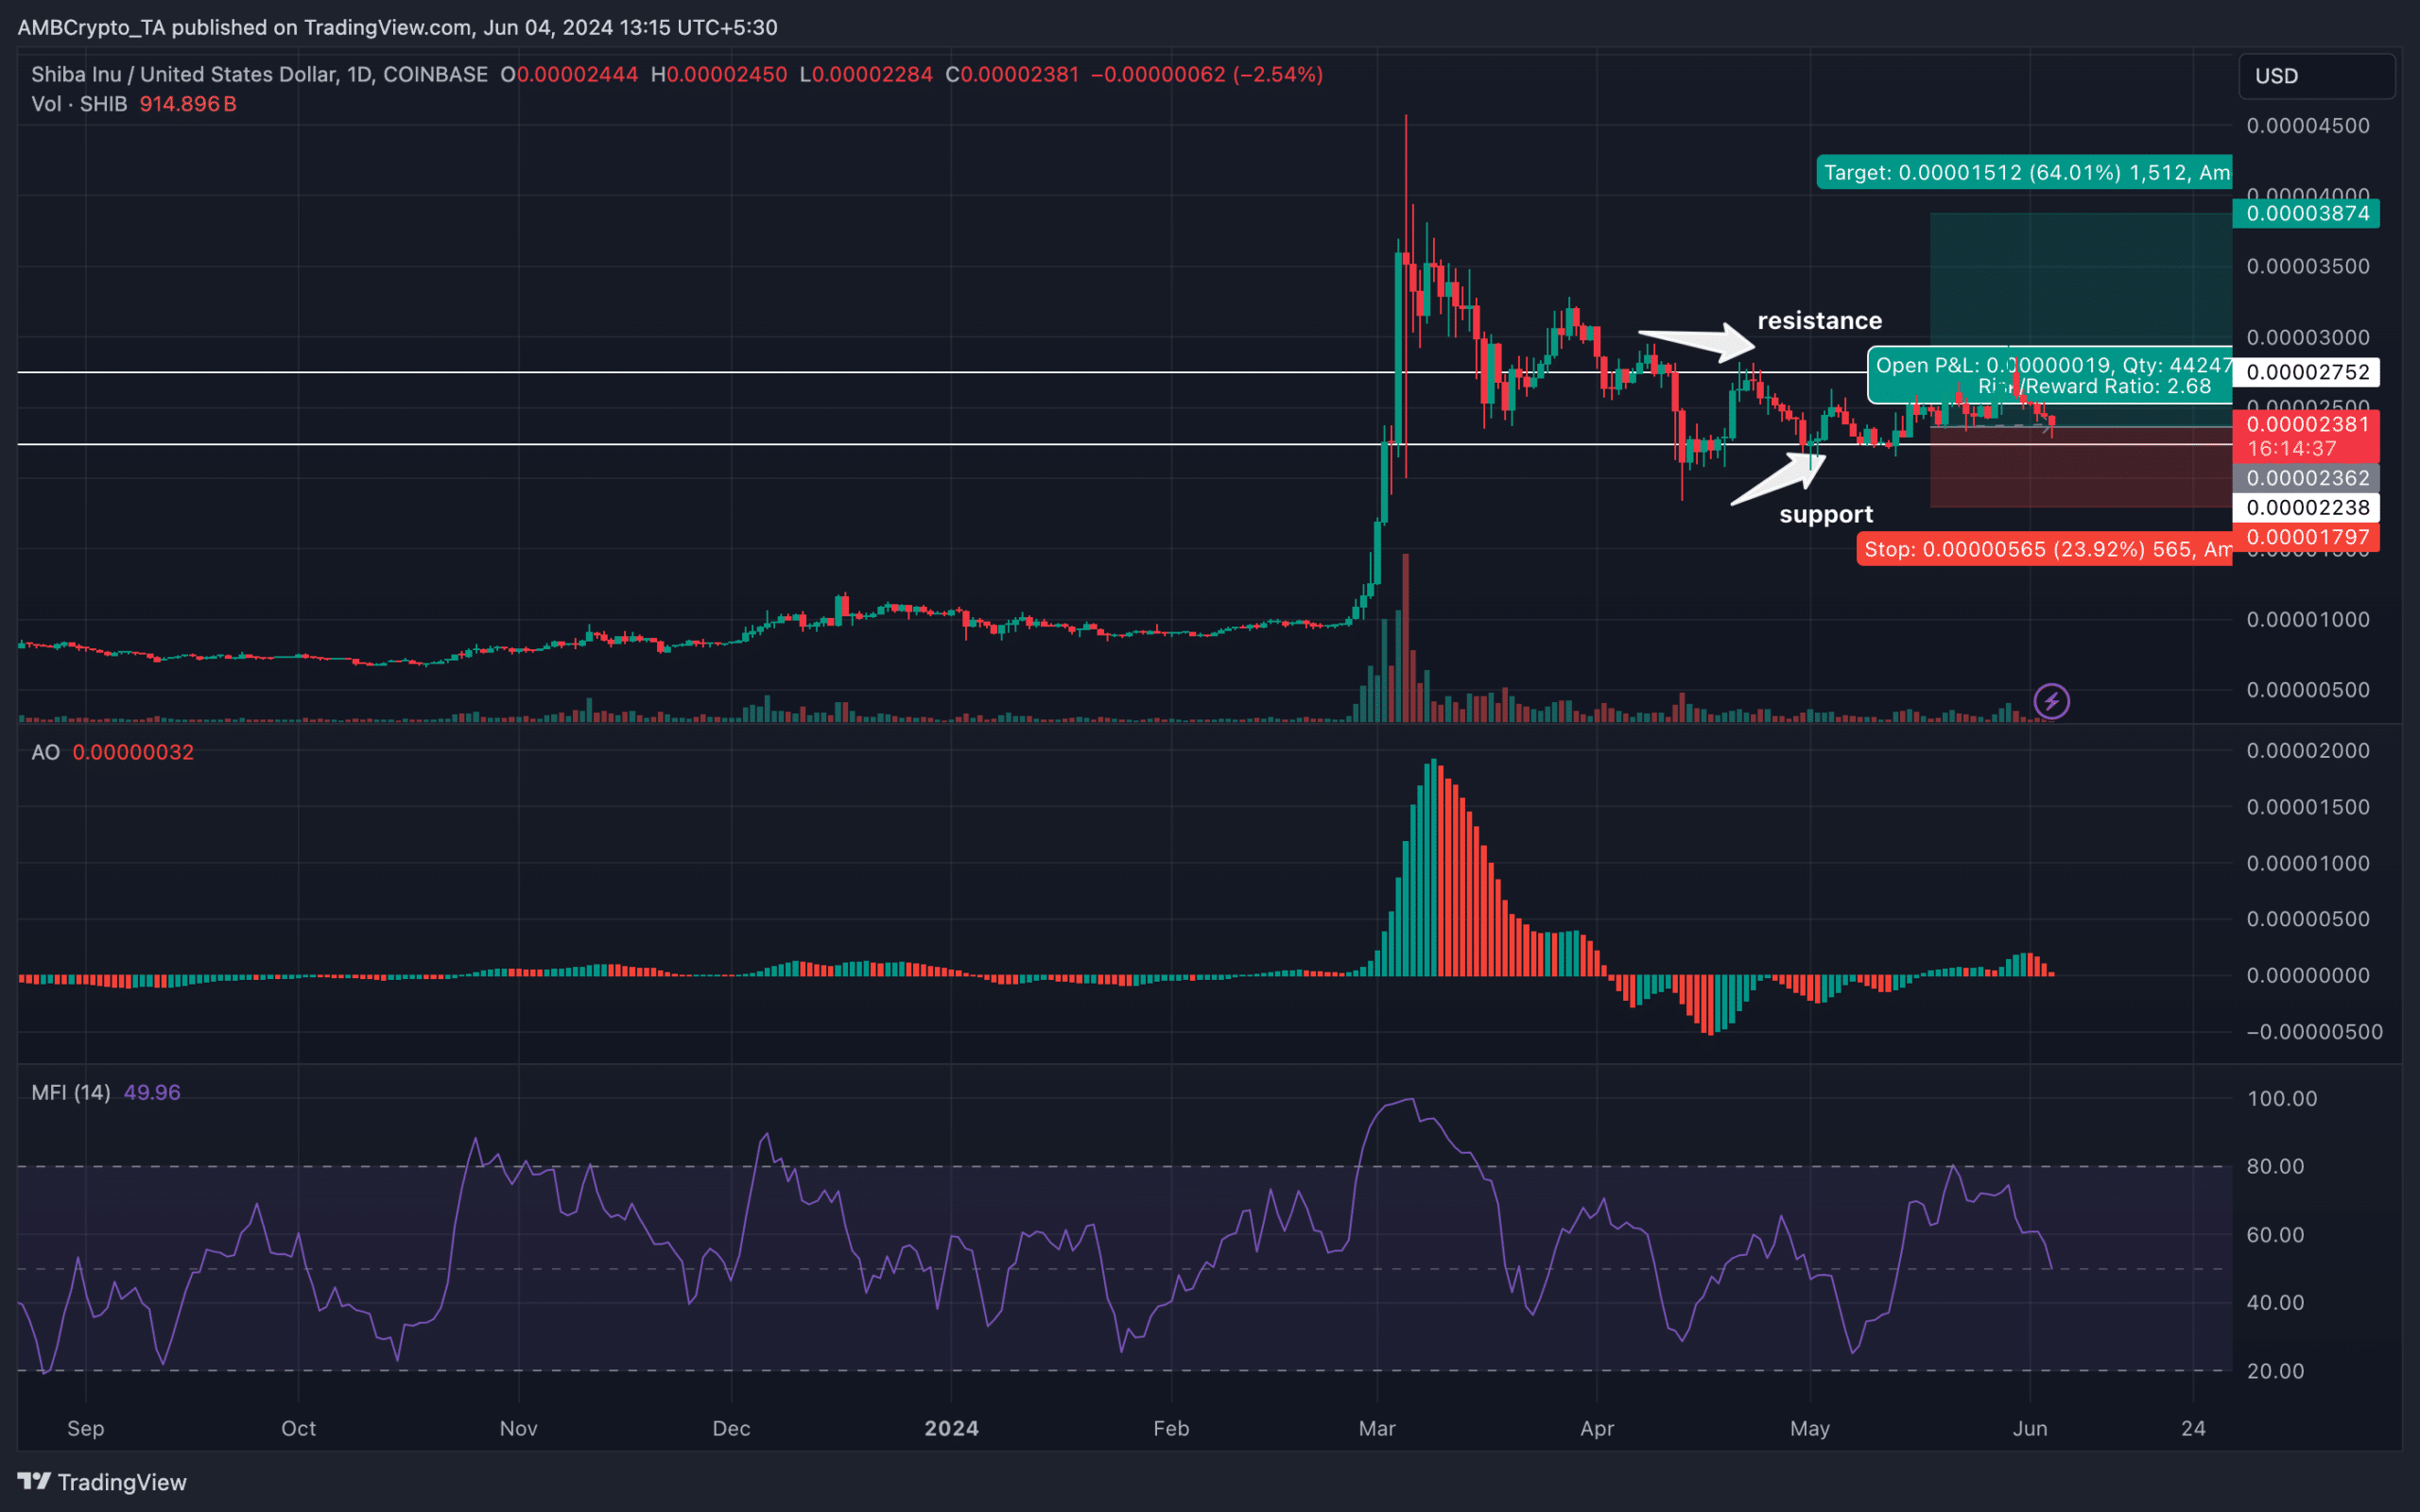 SHIB's price is caught in between support and resistance